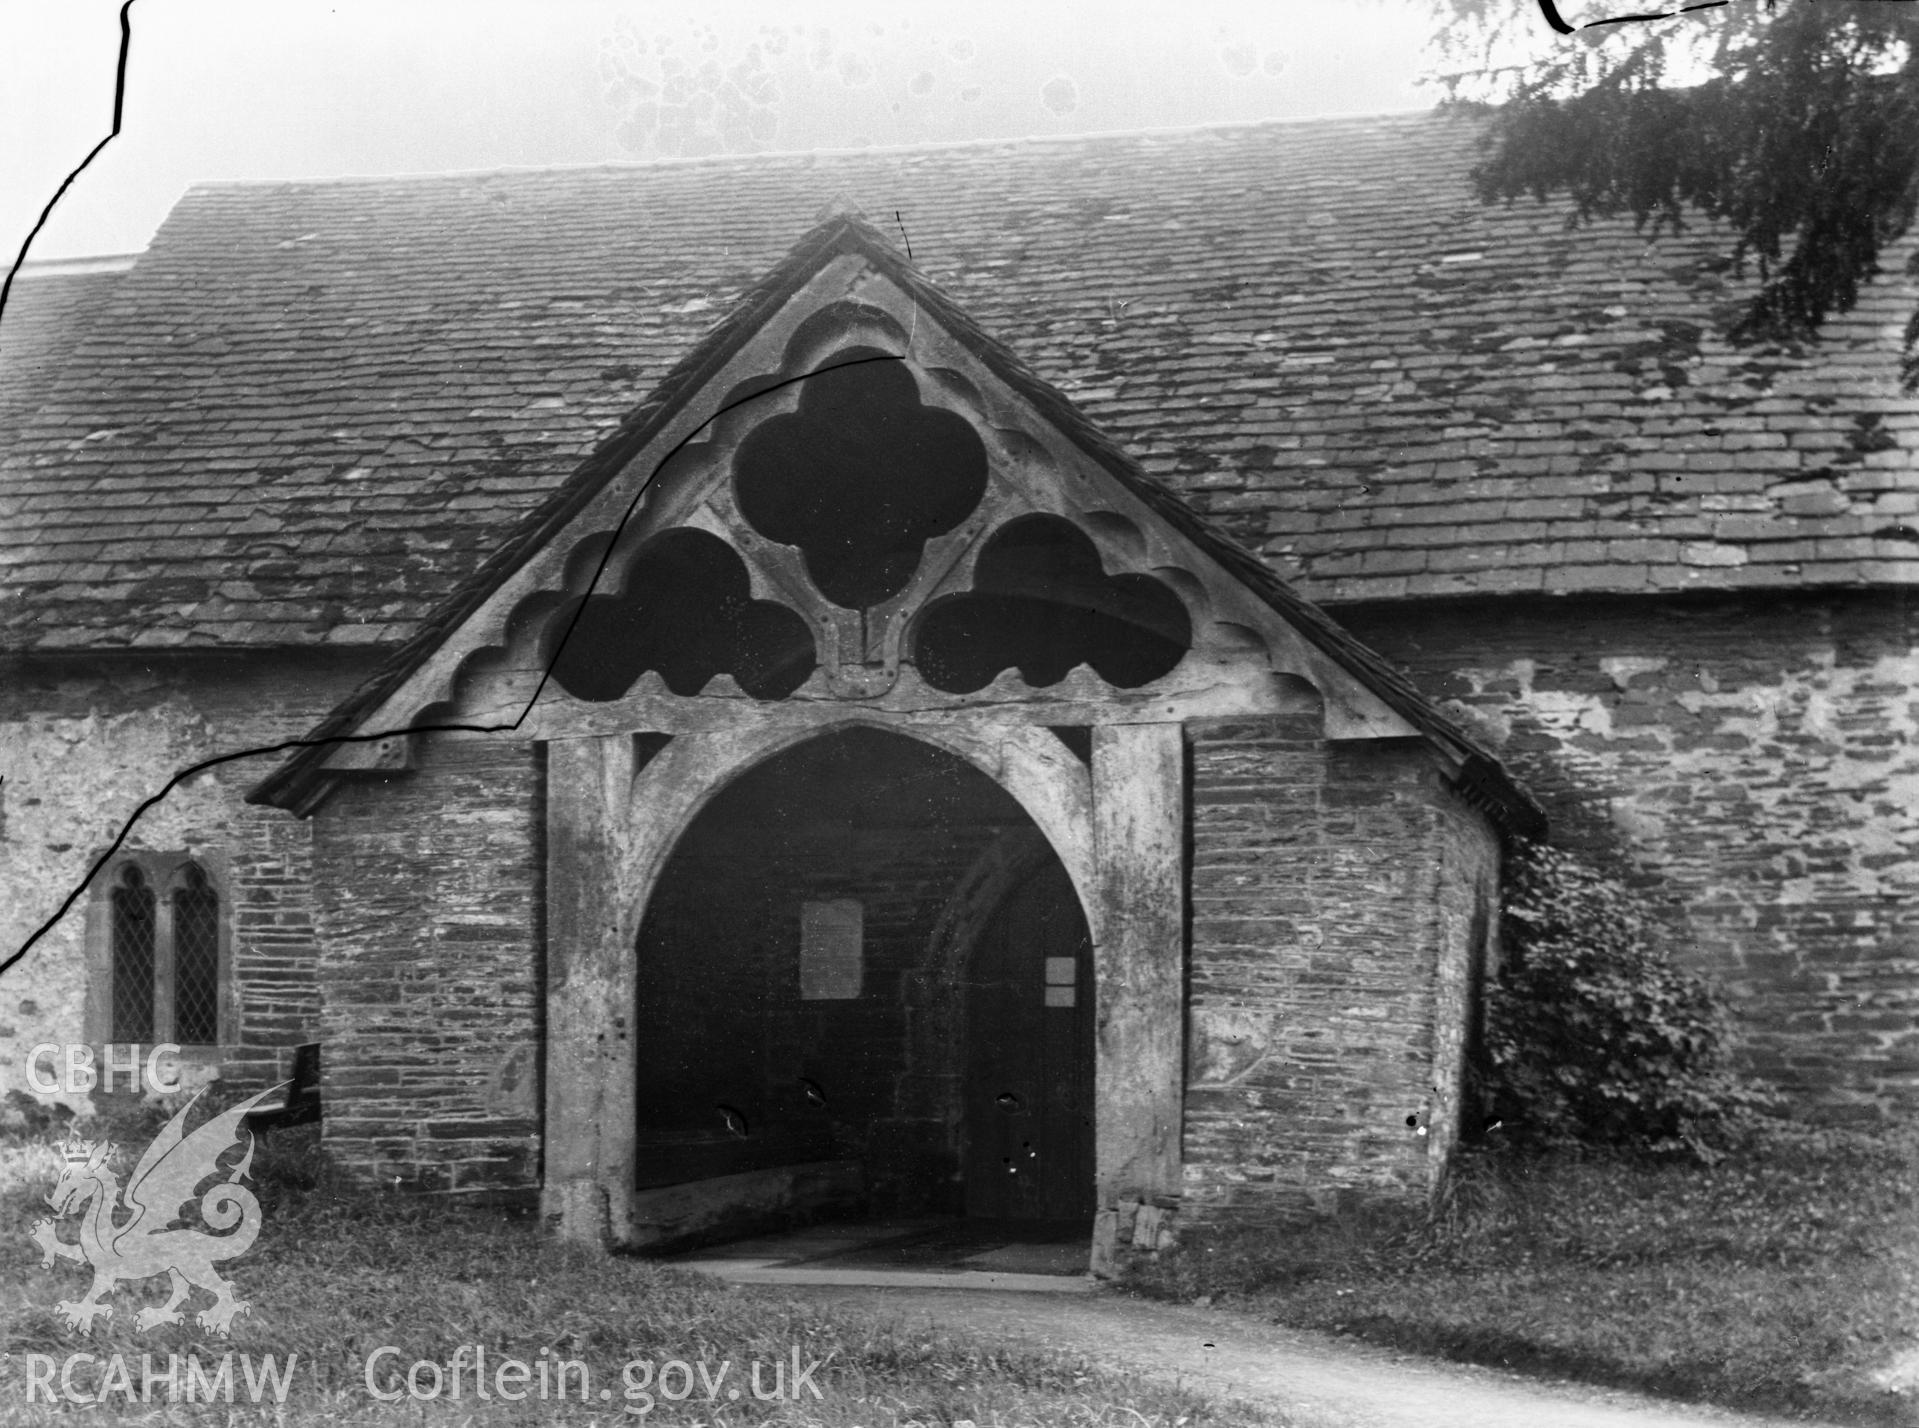 Black and white photo showing the entrance porch at Aberedw Church.